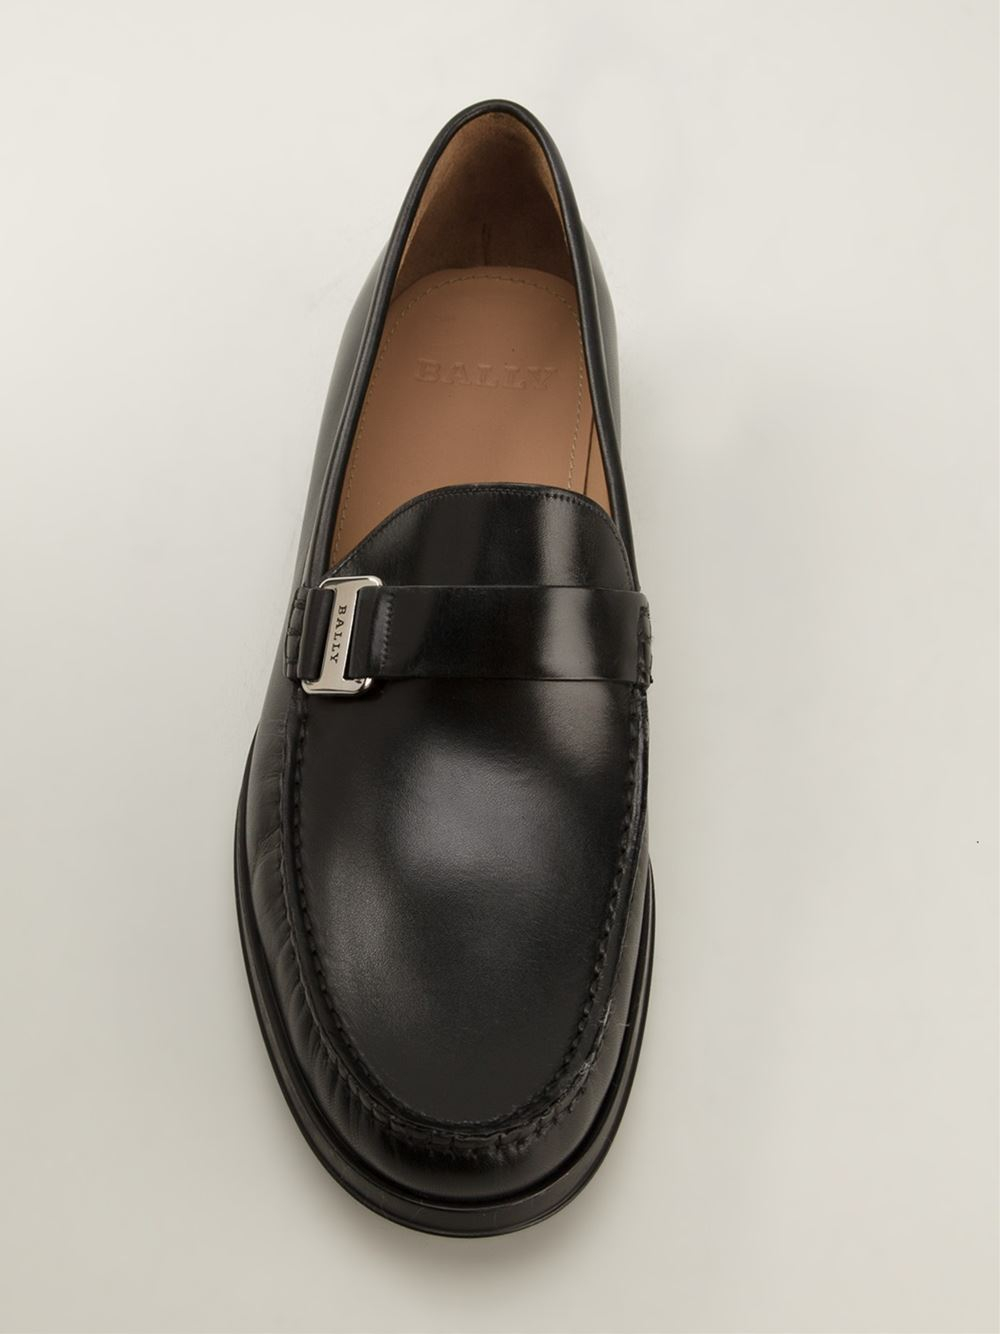 Bally Classic Loafers in Black for Men - Lyst